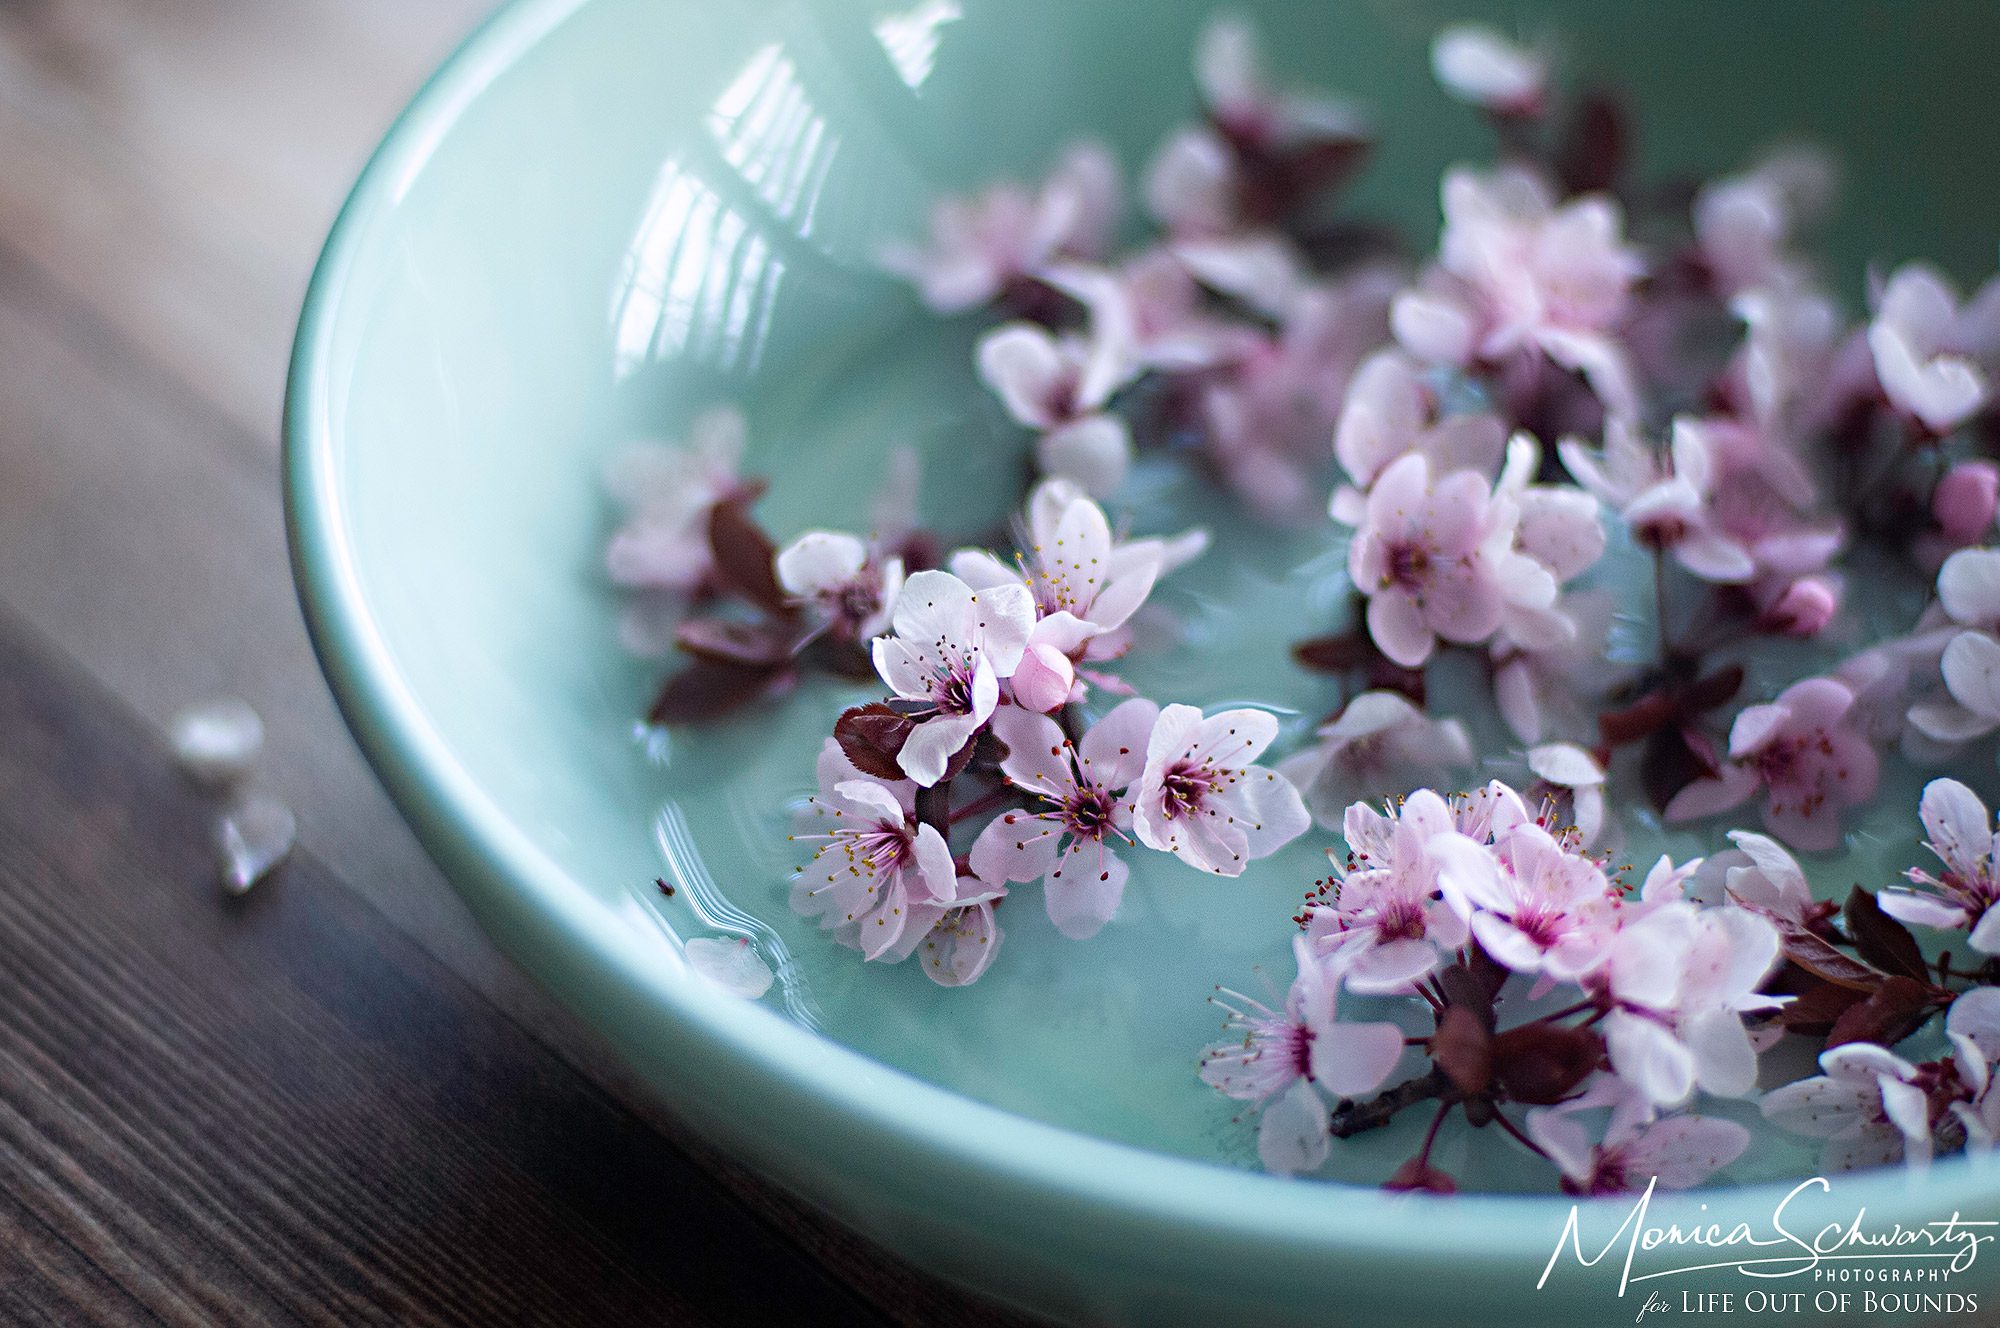 Lovely-and-delicate-pink-spring-blossoms-in-a-blue-bowl-still-life